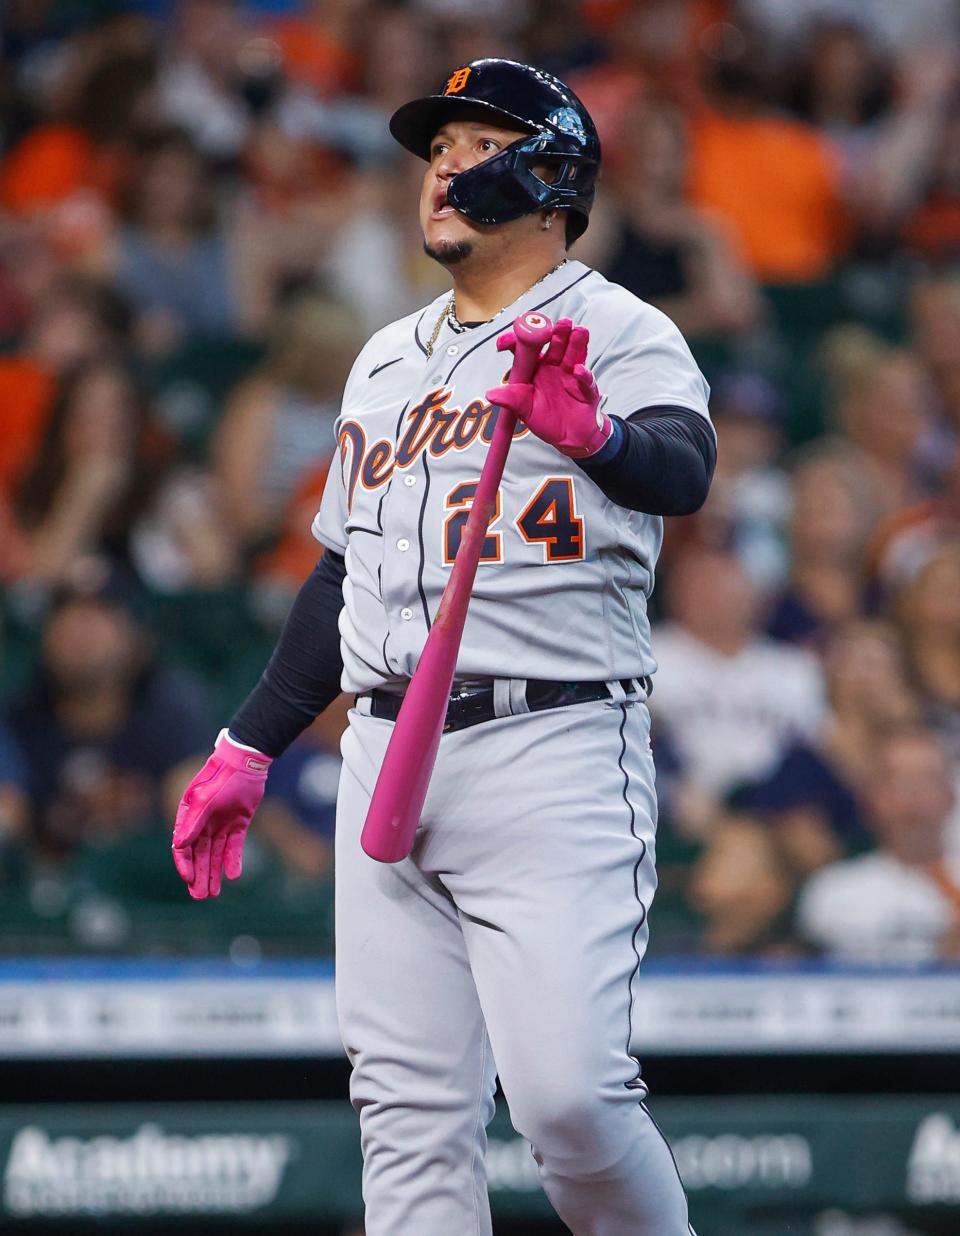 Detroit Tigers designated hitter Miguel Cabrera (24) reacts after a pitch during the second inning against the Houston Astros at Minute Maid Park.